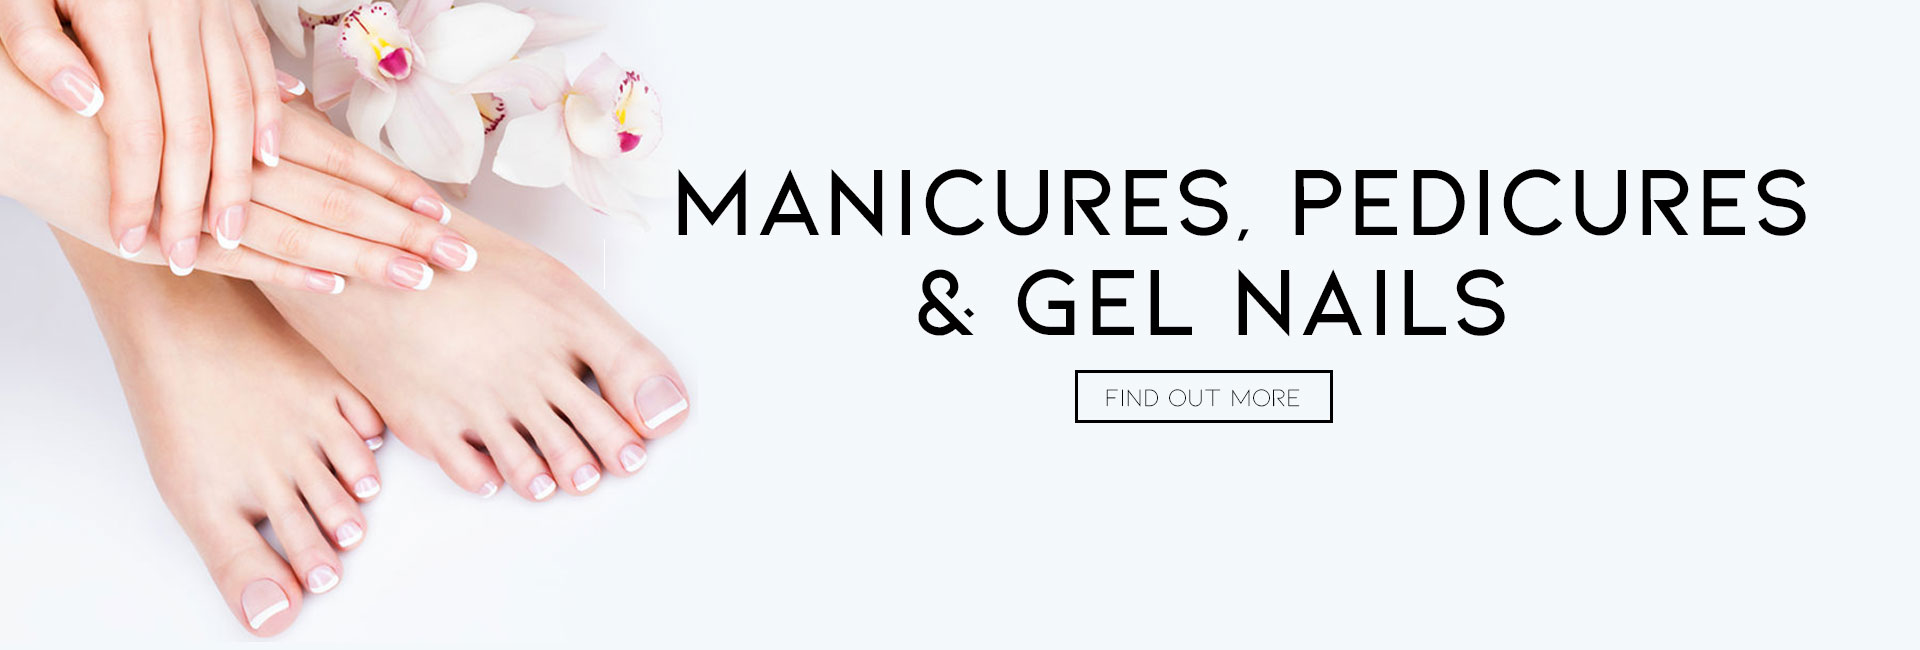 Manicures Pedicures Gel Nails at melanie richards hair and beauty salon in peterborough